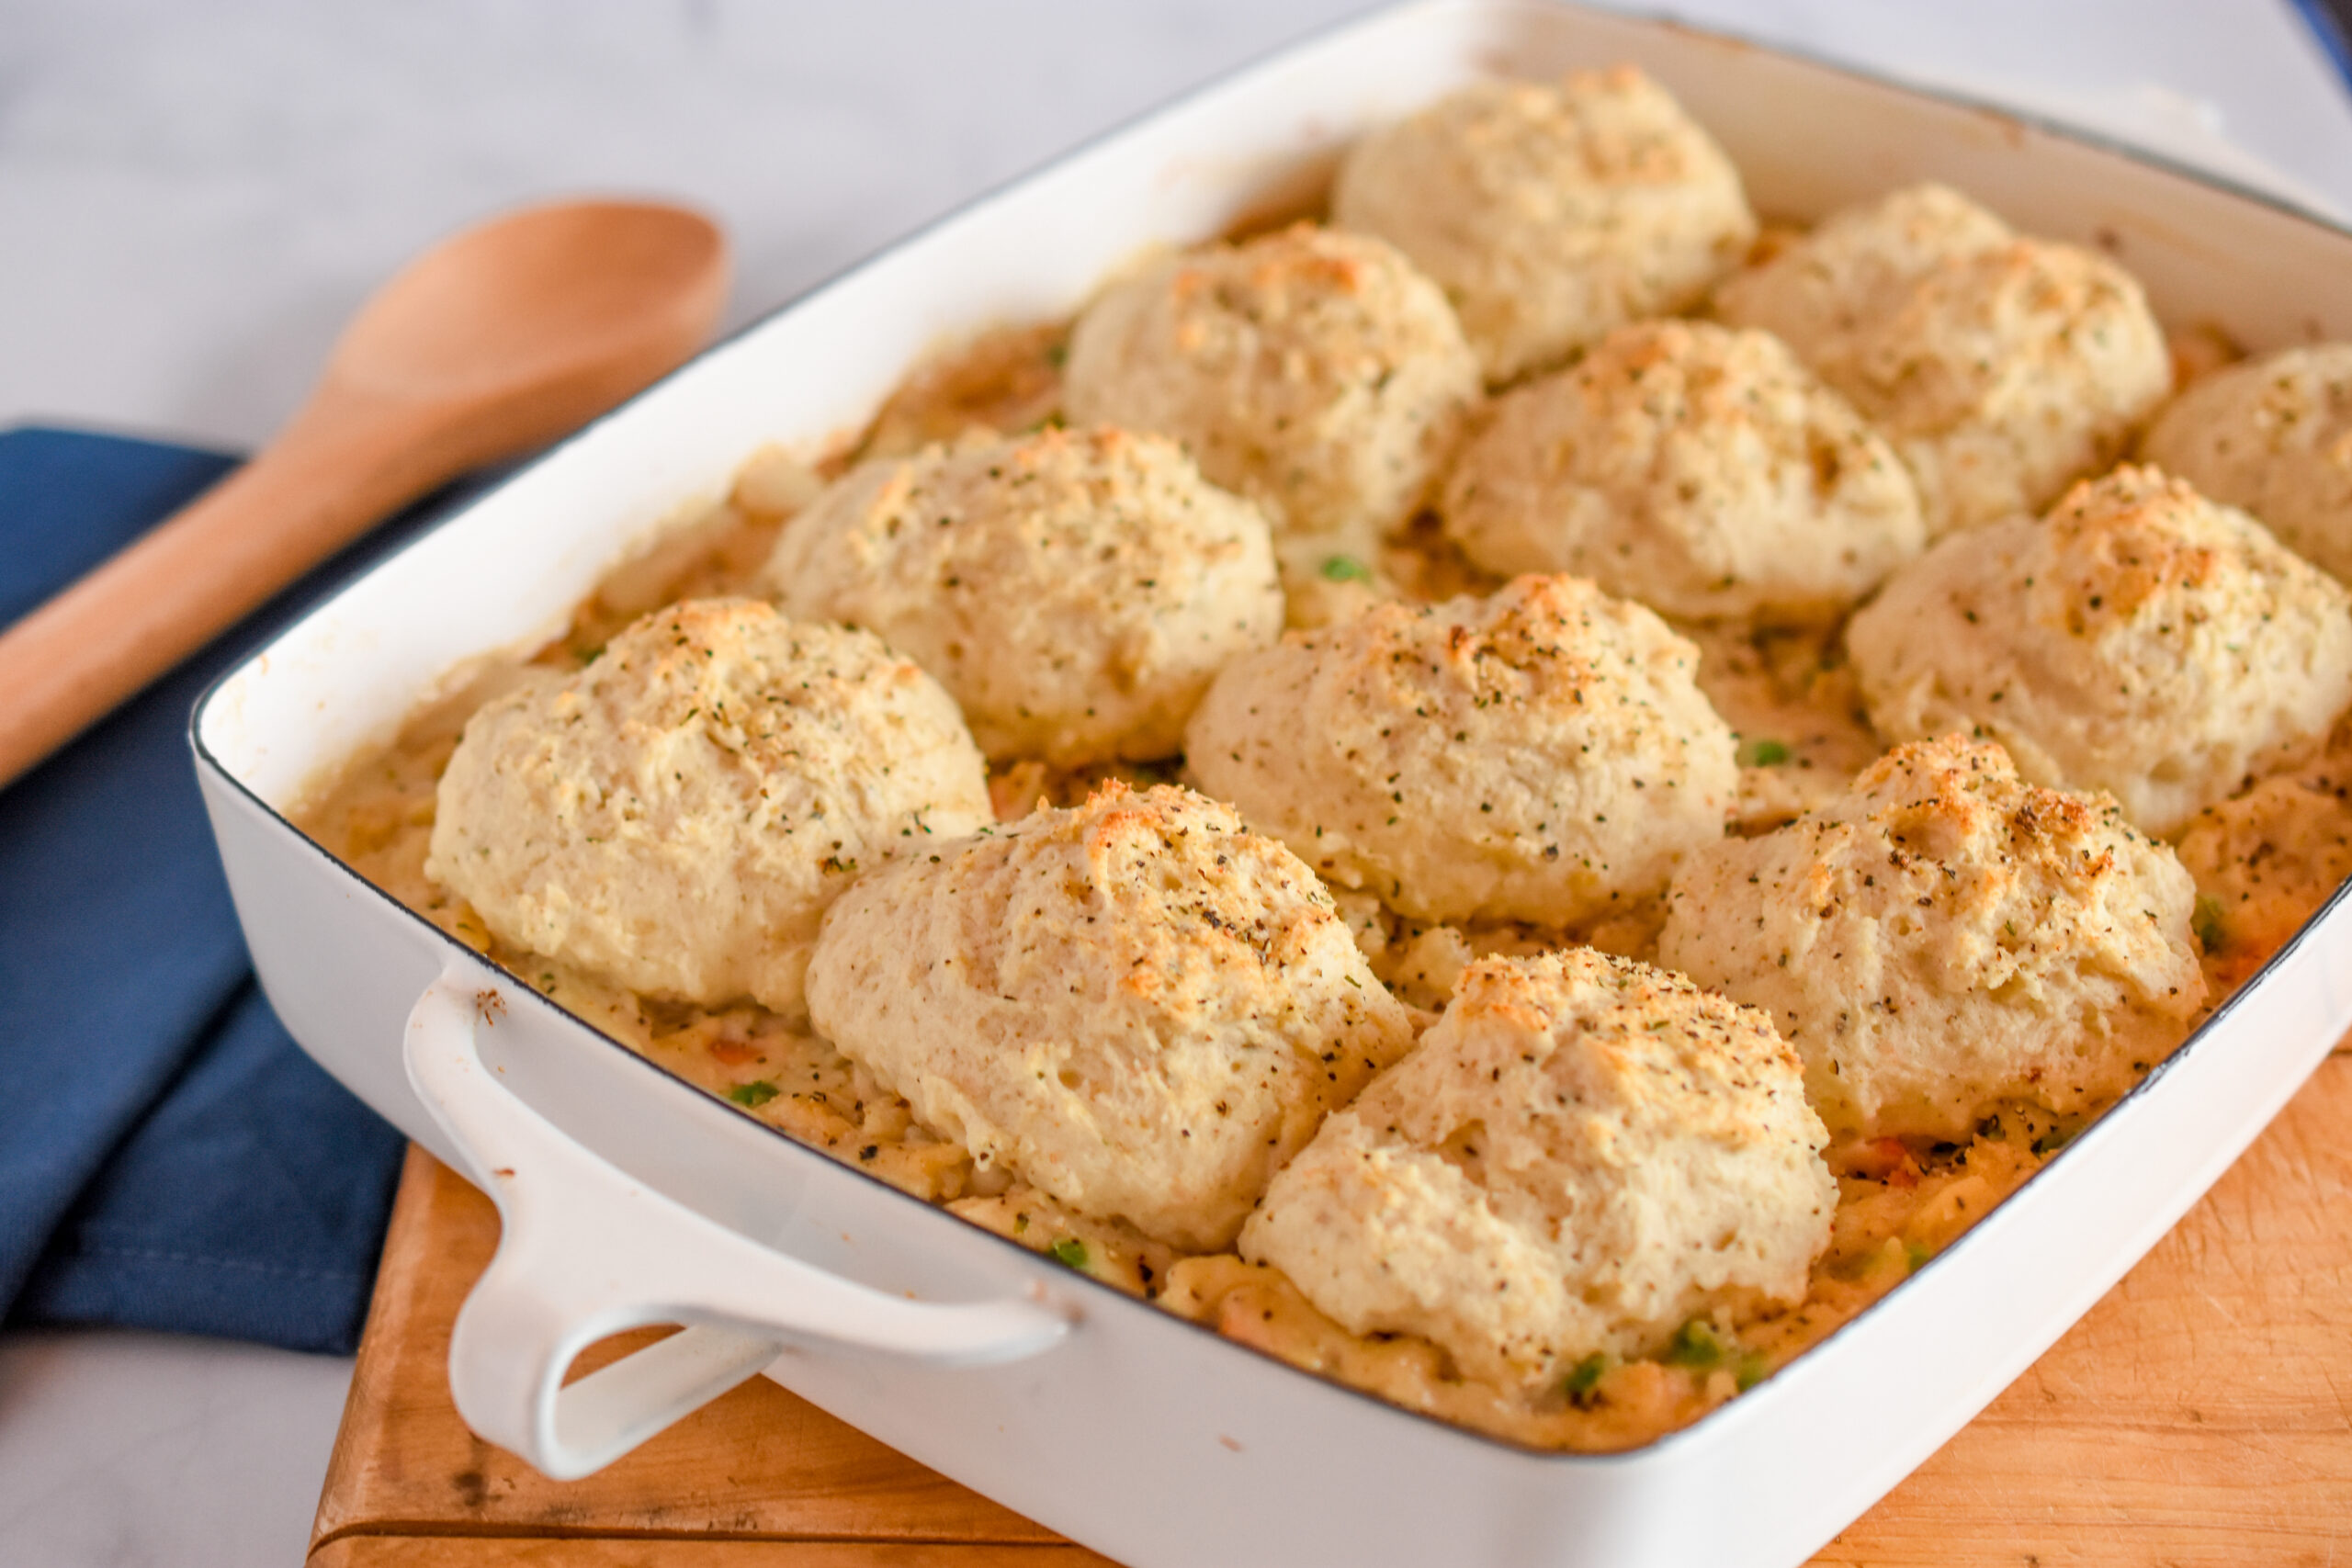 Tone’s Biscuit Topped Chicken Pot Pie Recipe